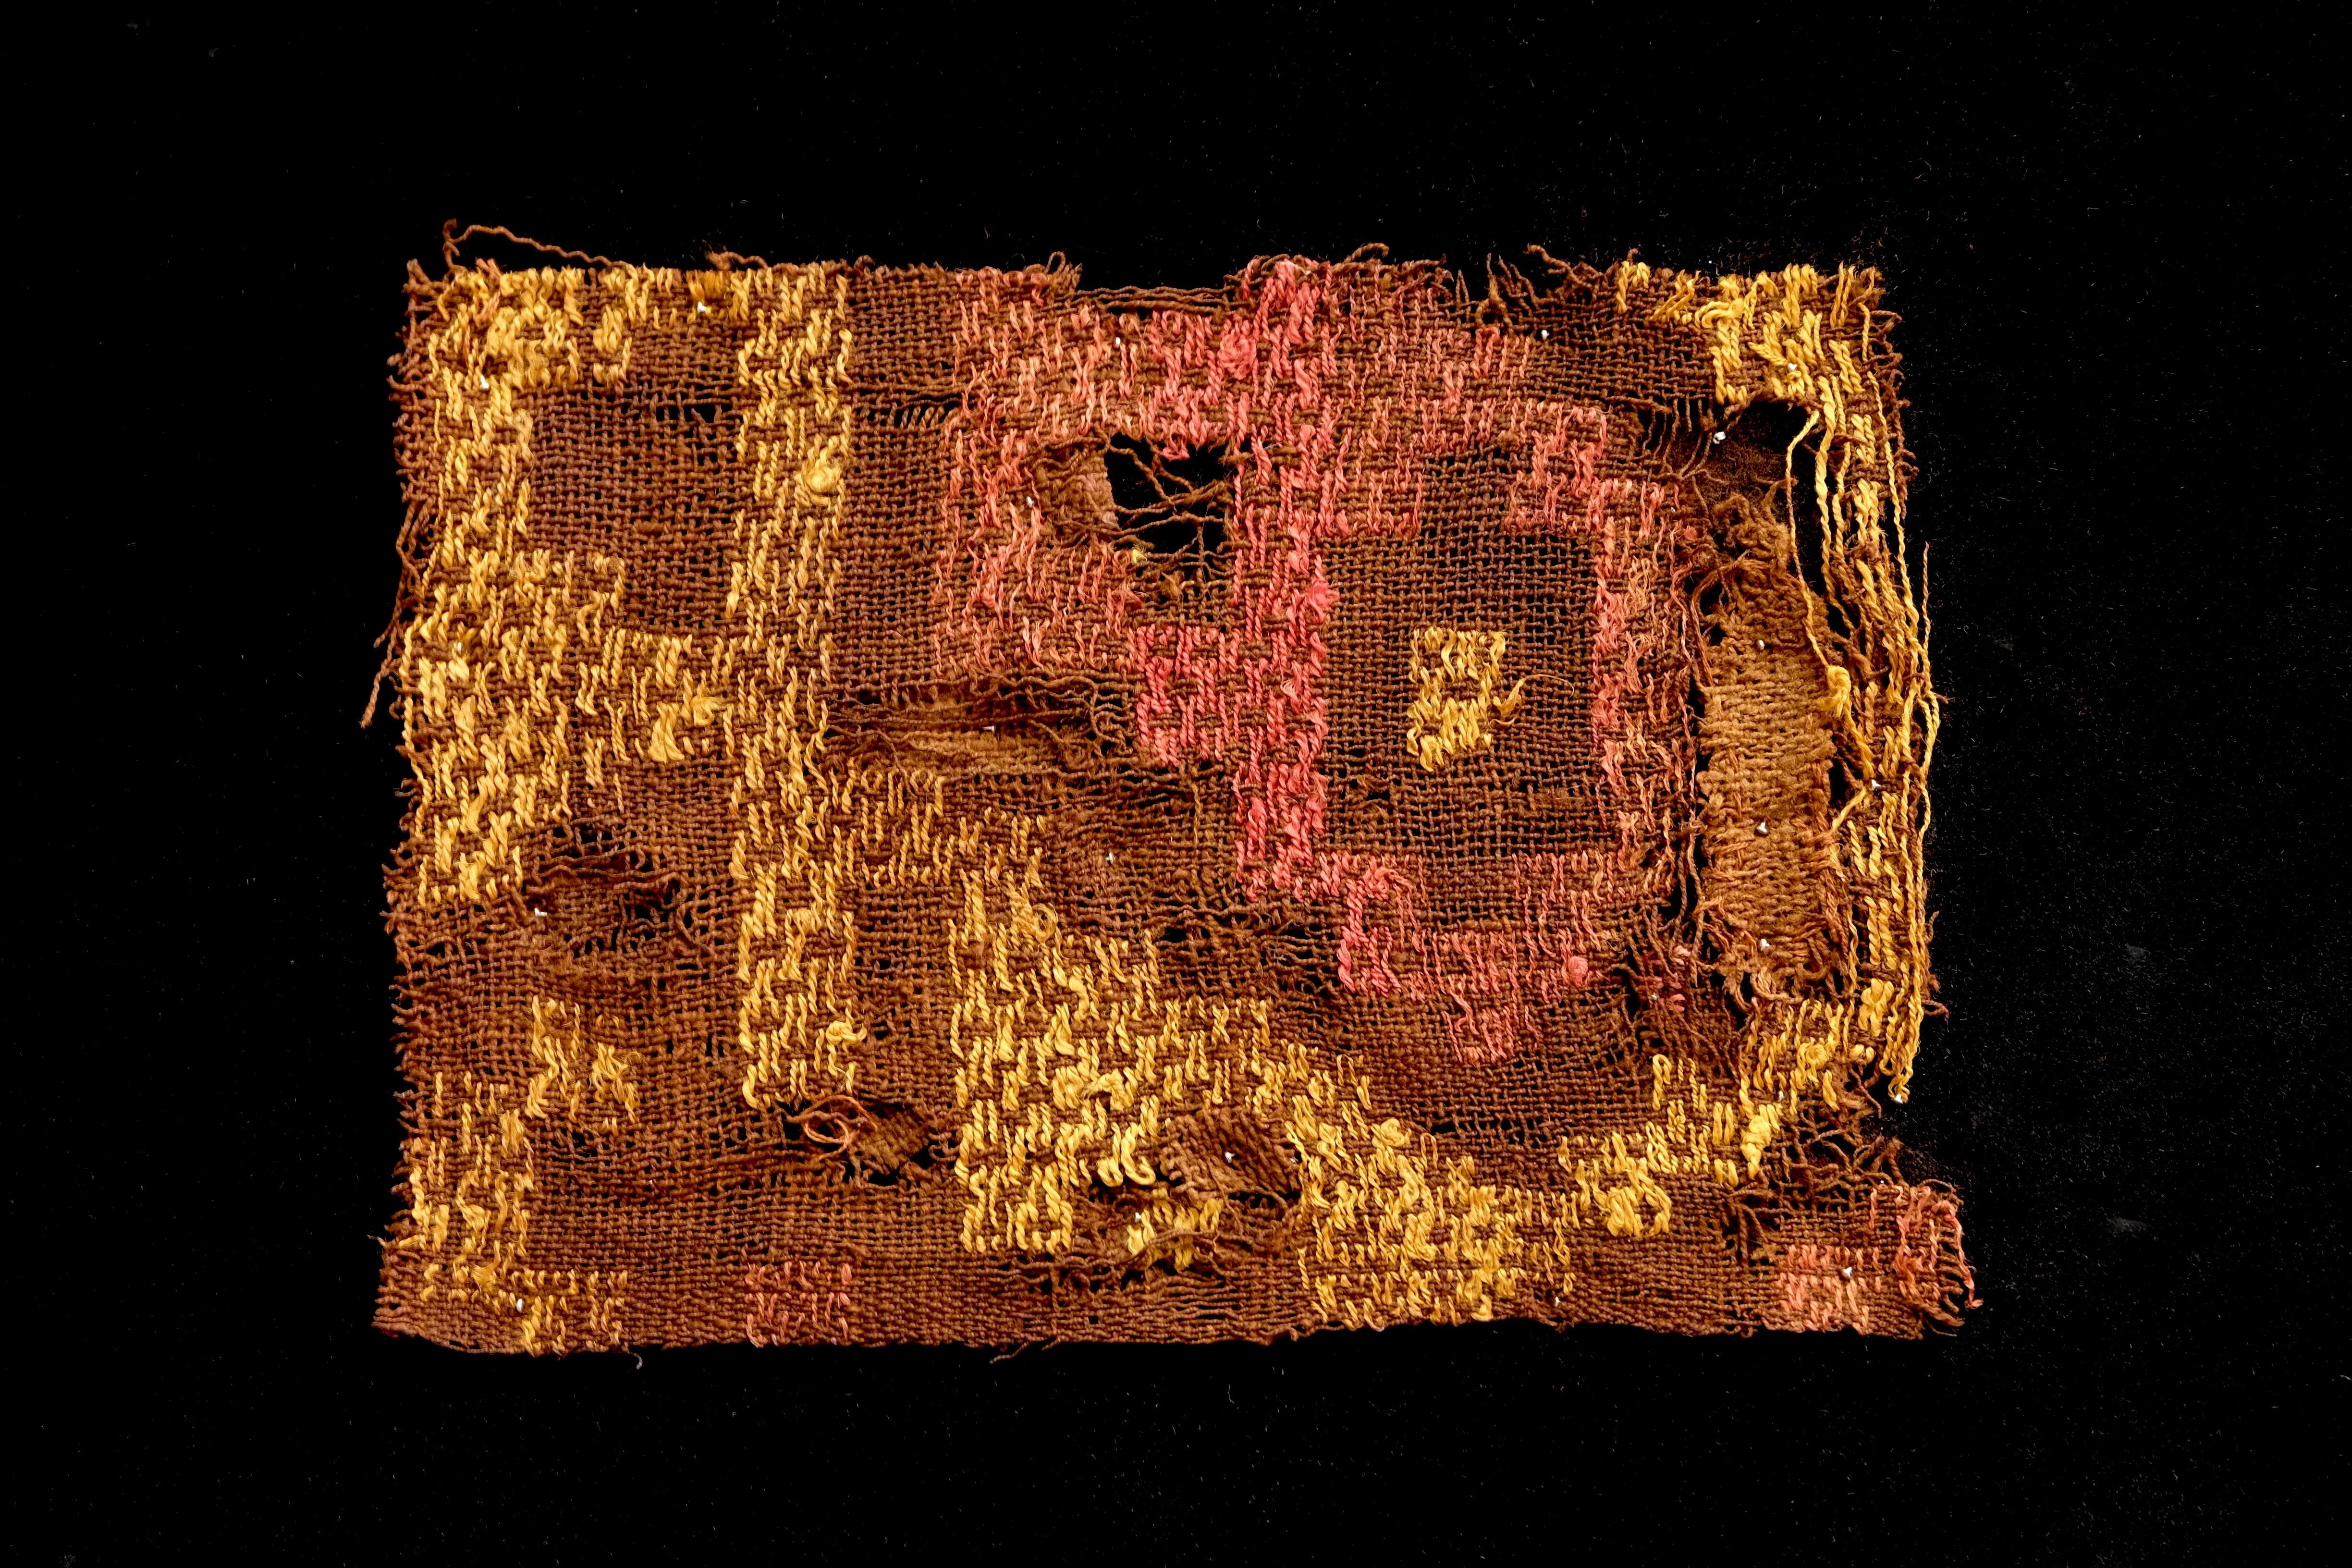 Bright yellow and pink in geometric arrangements adorn this brown pre-Columbian textile fragment.? Framed in a black shadow box.

It is a wonder to behold antiquities such as a pre-Columbian textiles, an authentic piece of art that has been